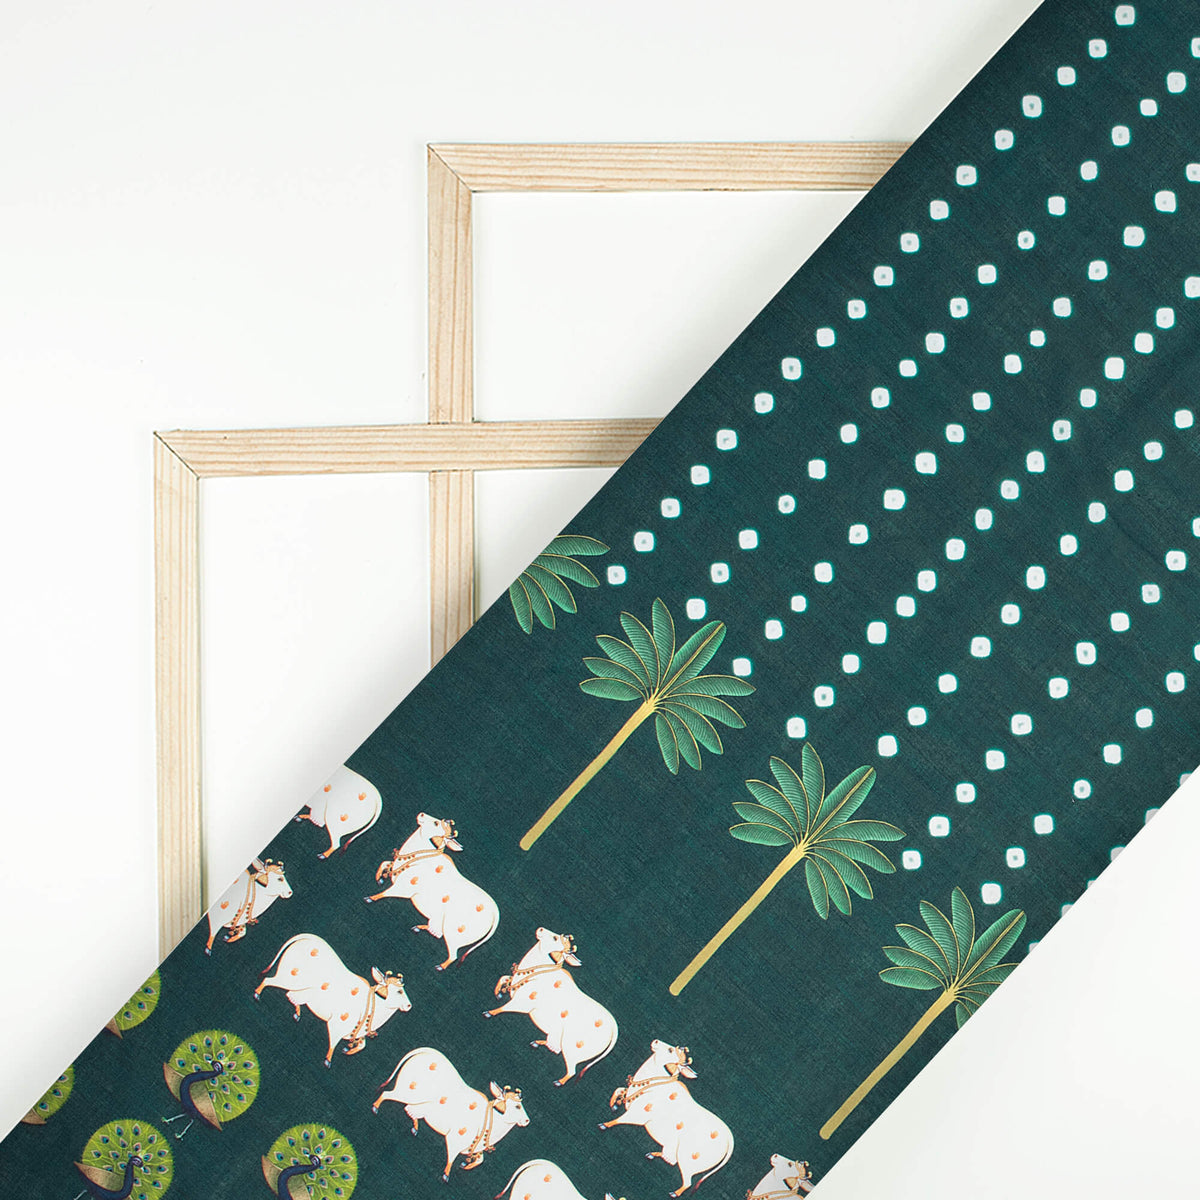 Dark Green And White Pichwaii Pattern Digital Print Poly Cambric Fabric